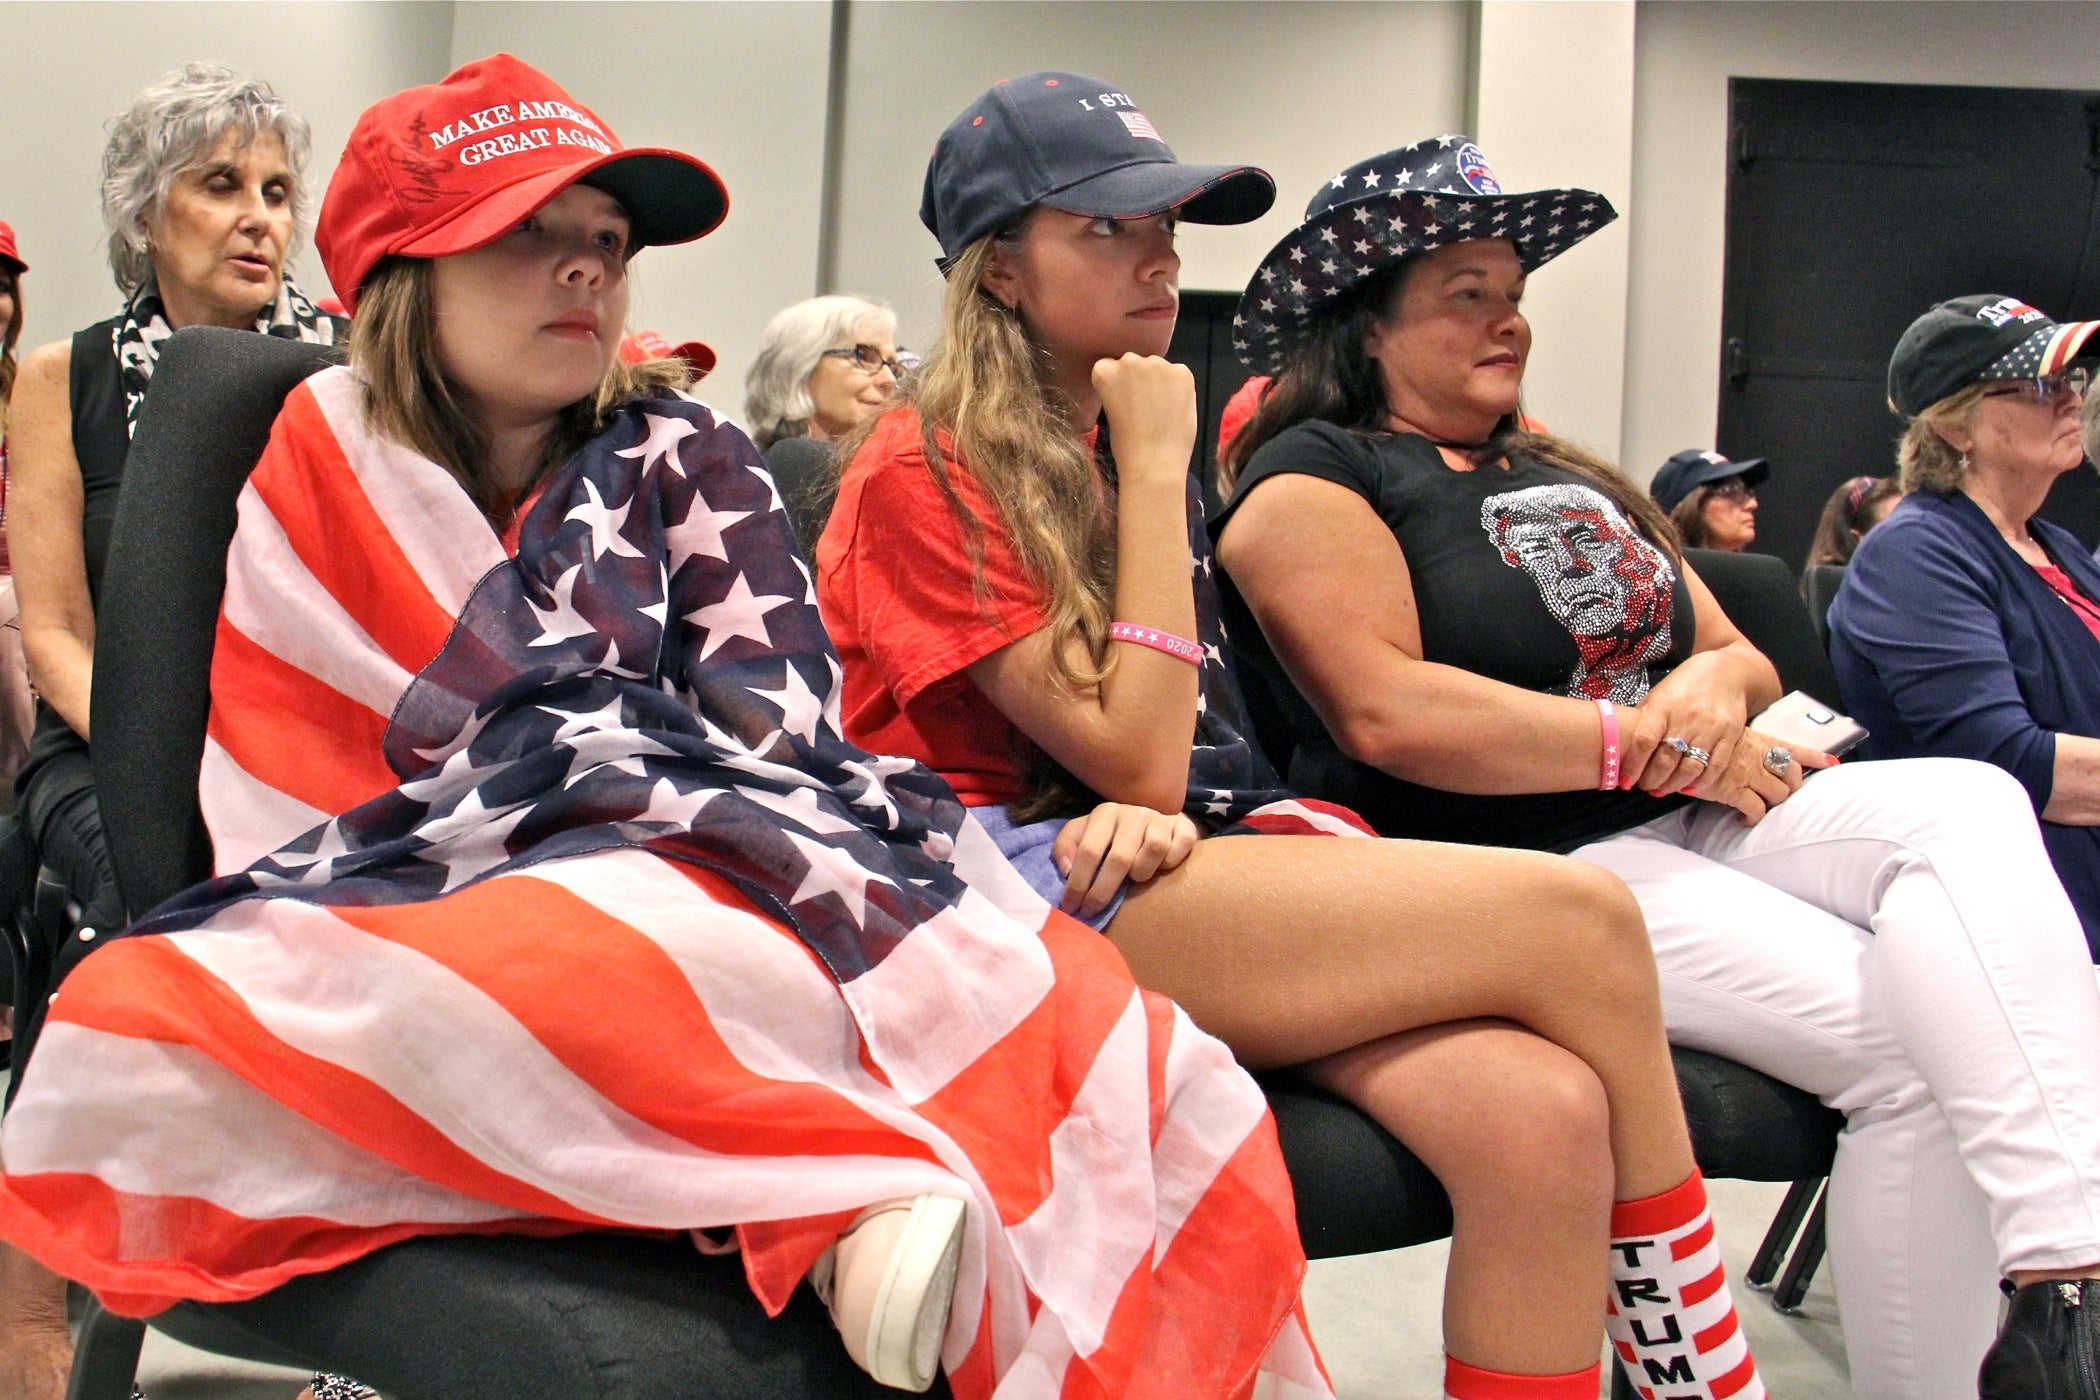 2019-07-16-e-lee-king-of-prussia-women-for-trump-rally-2.jpg